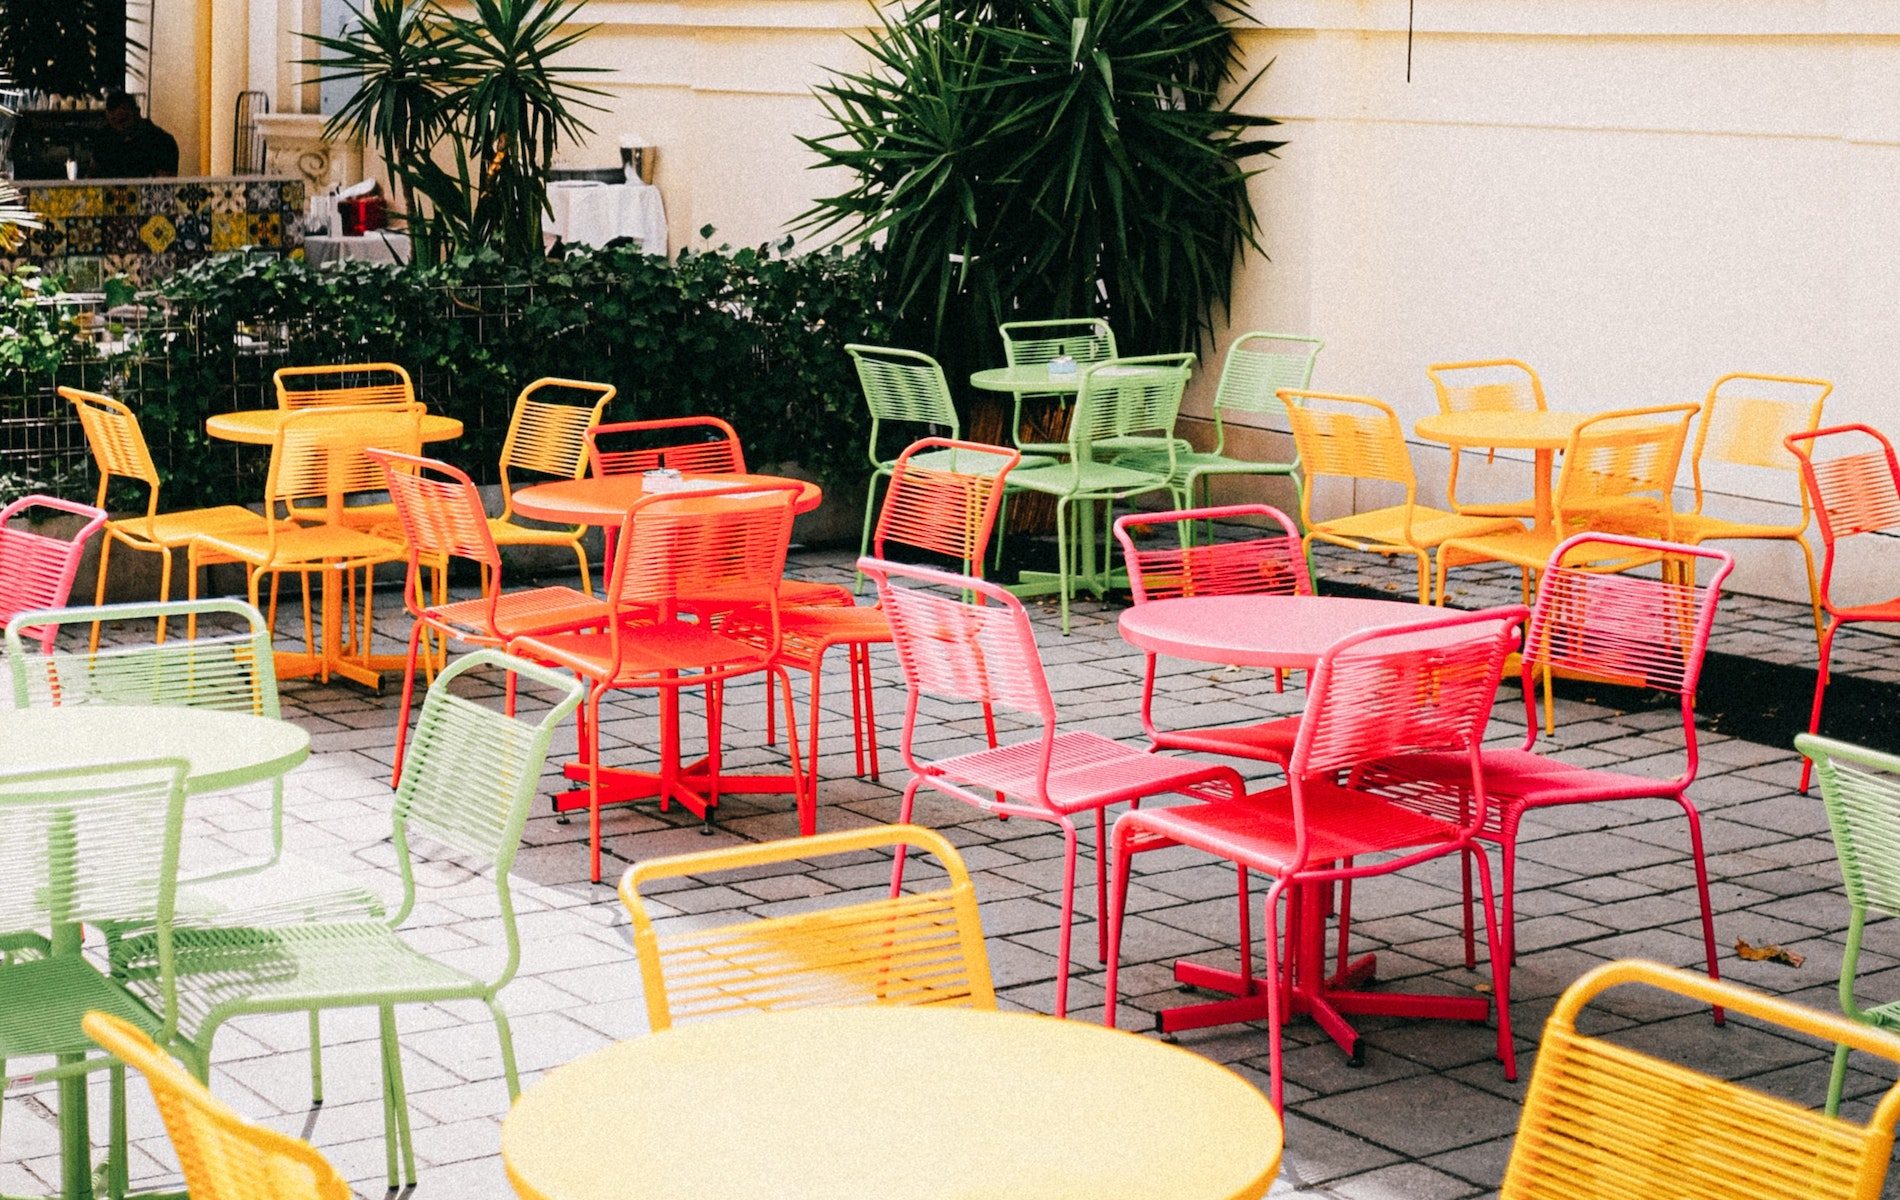 clusters of yellow, red, orange and green table and chairs outside on grey pavers